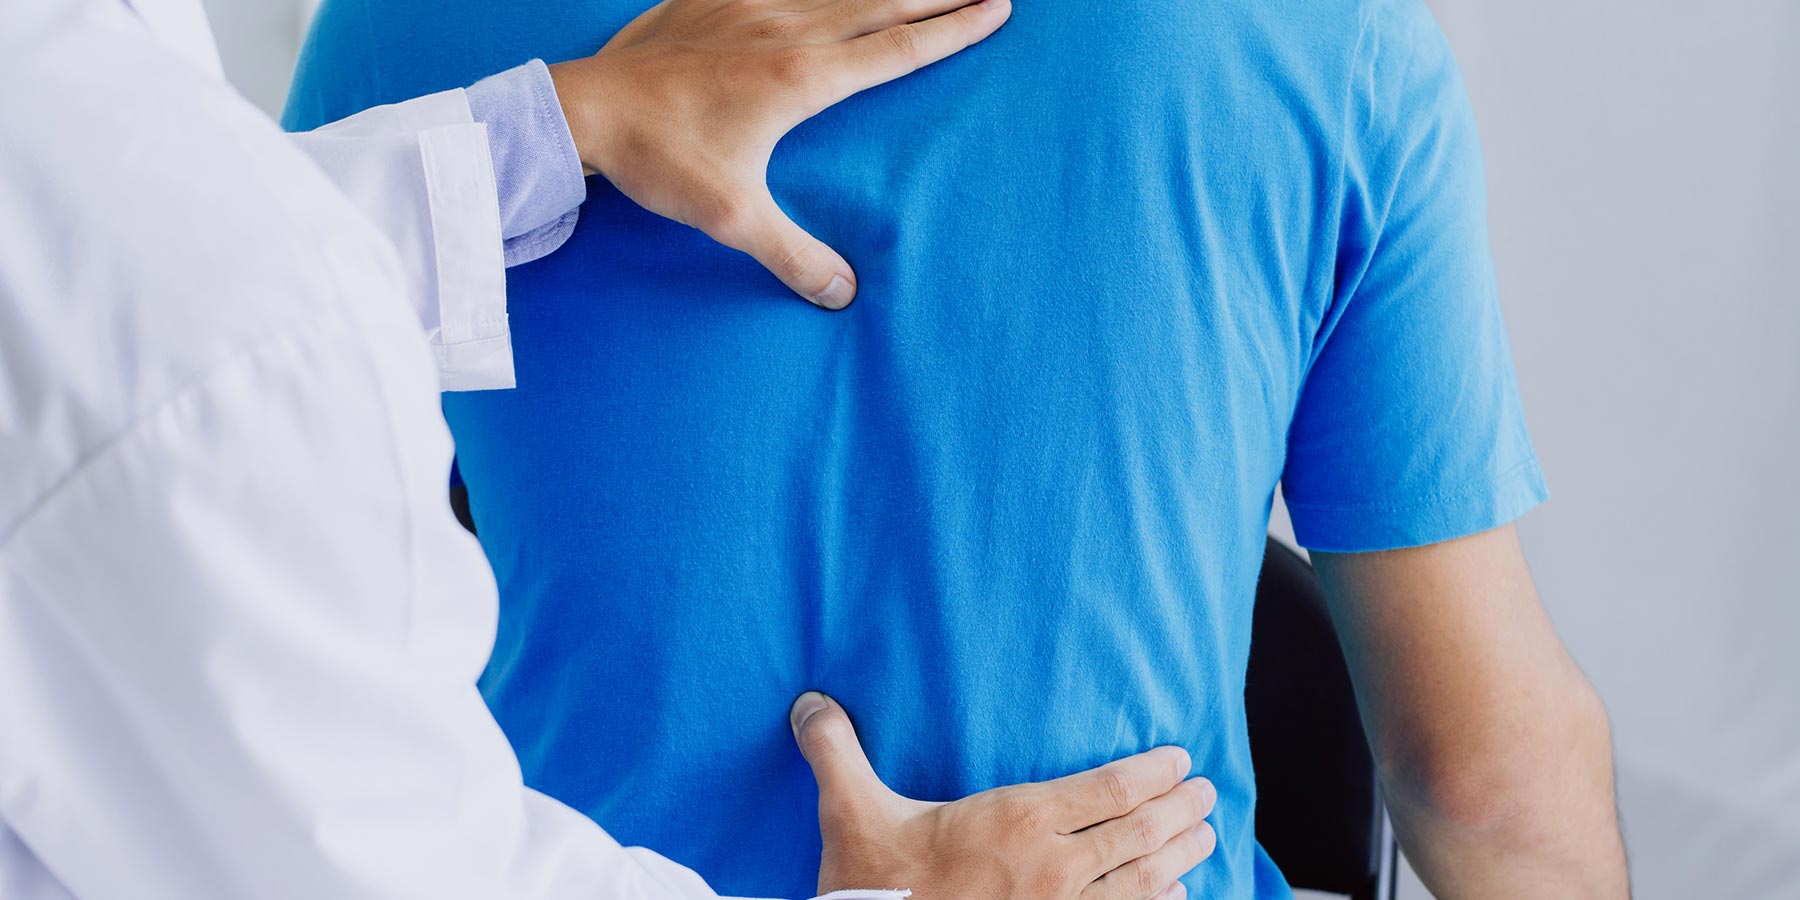 A male patient is undergoing a lumbar assessment conducted by a specialized neurosurgeon.